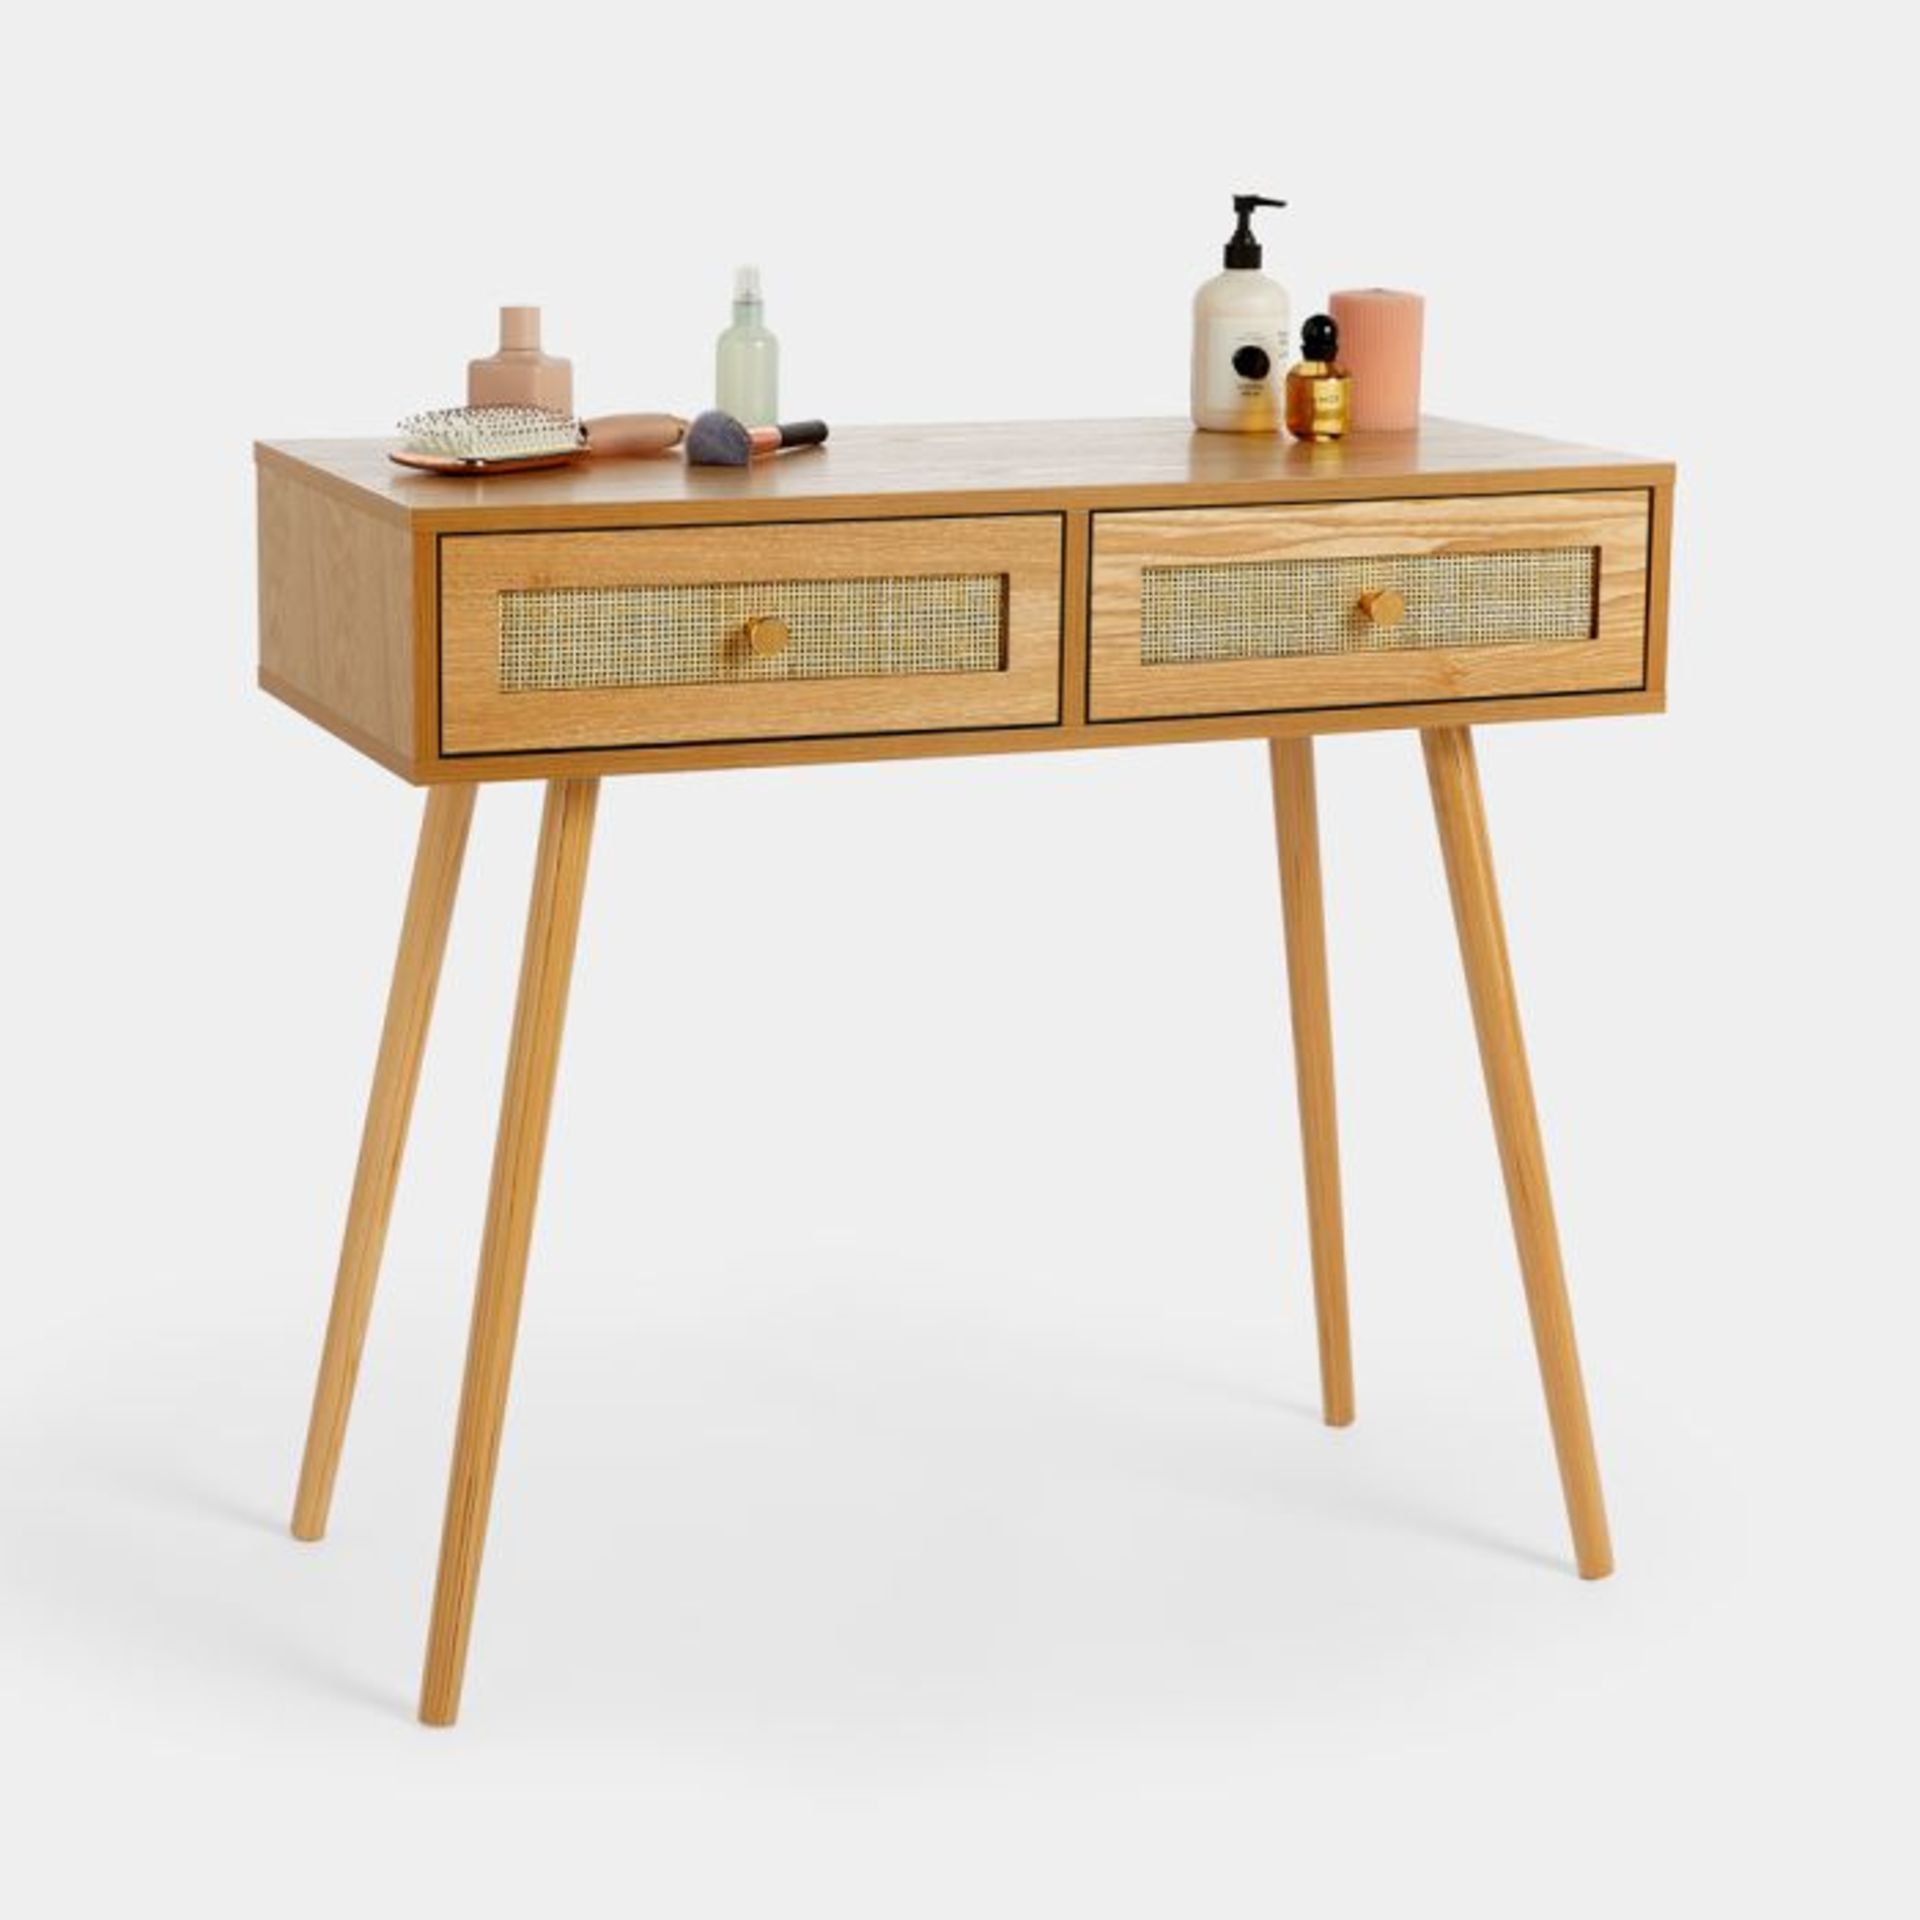 Rattan Dressing Table Desk. - ER37. Bring an earthy, natural feel to your space with a combination